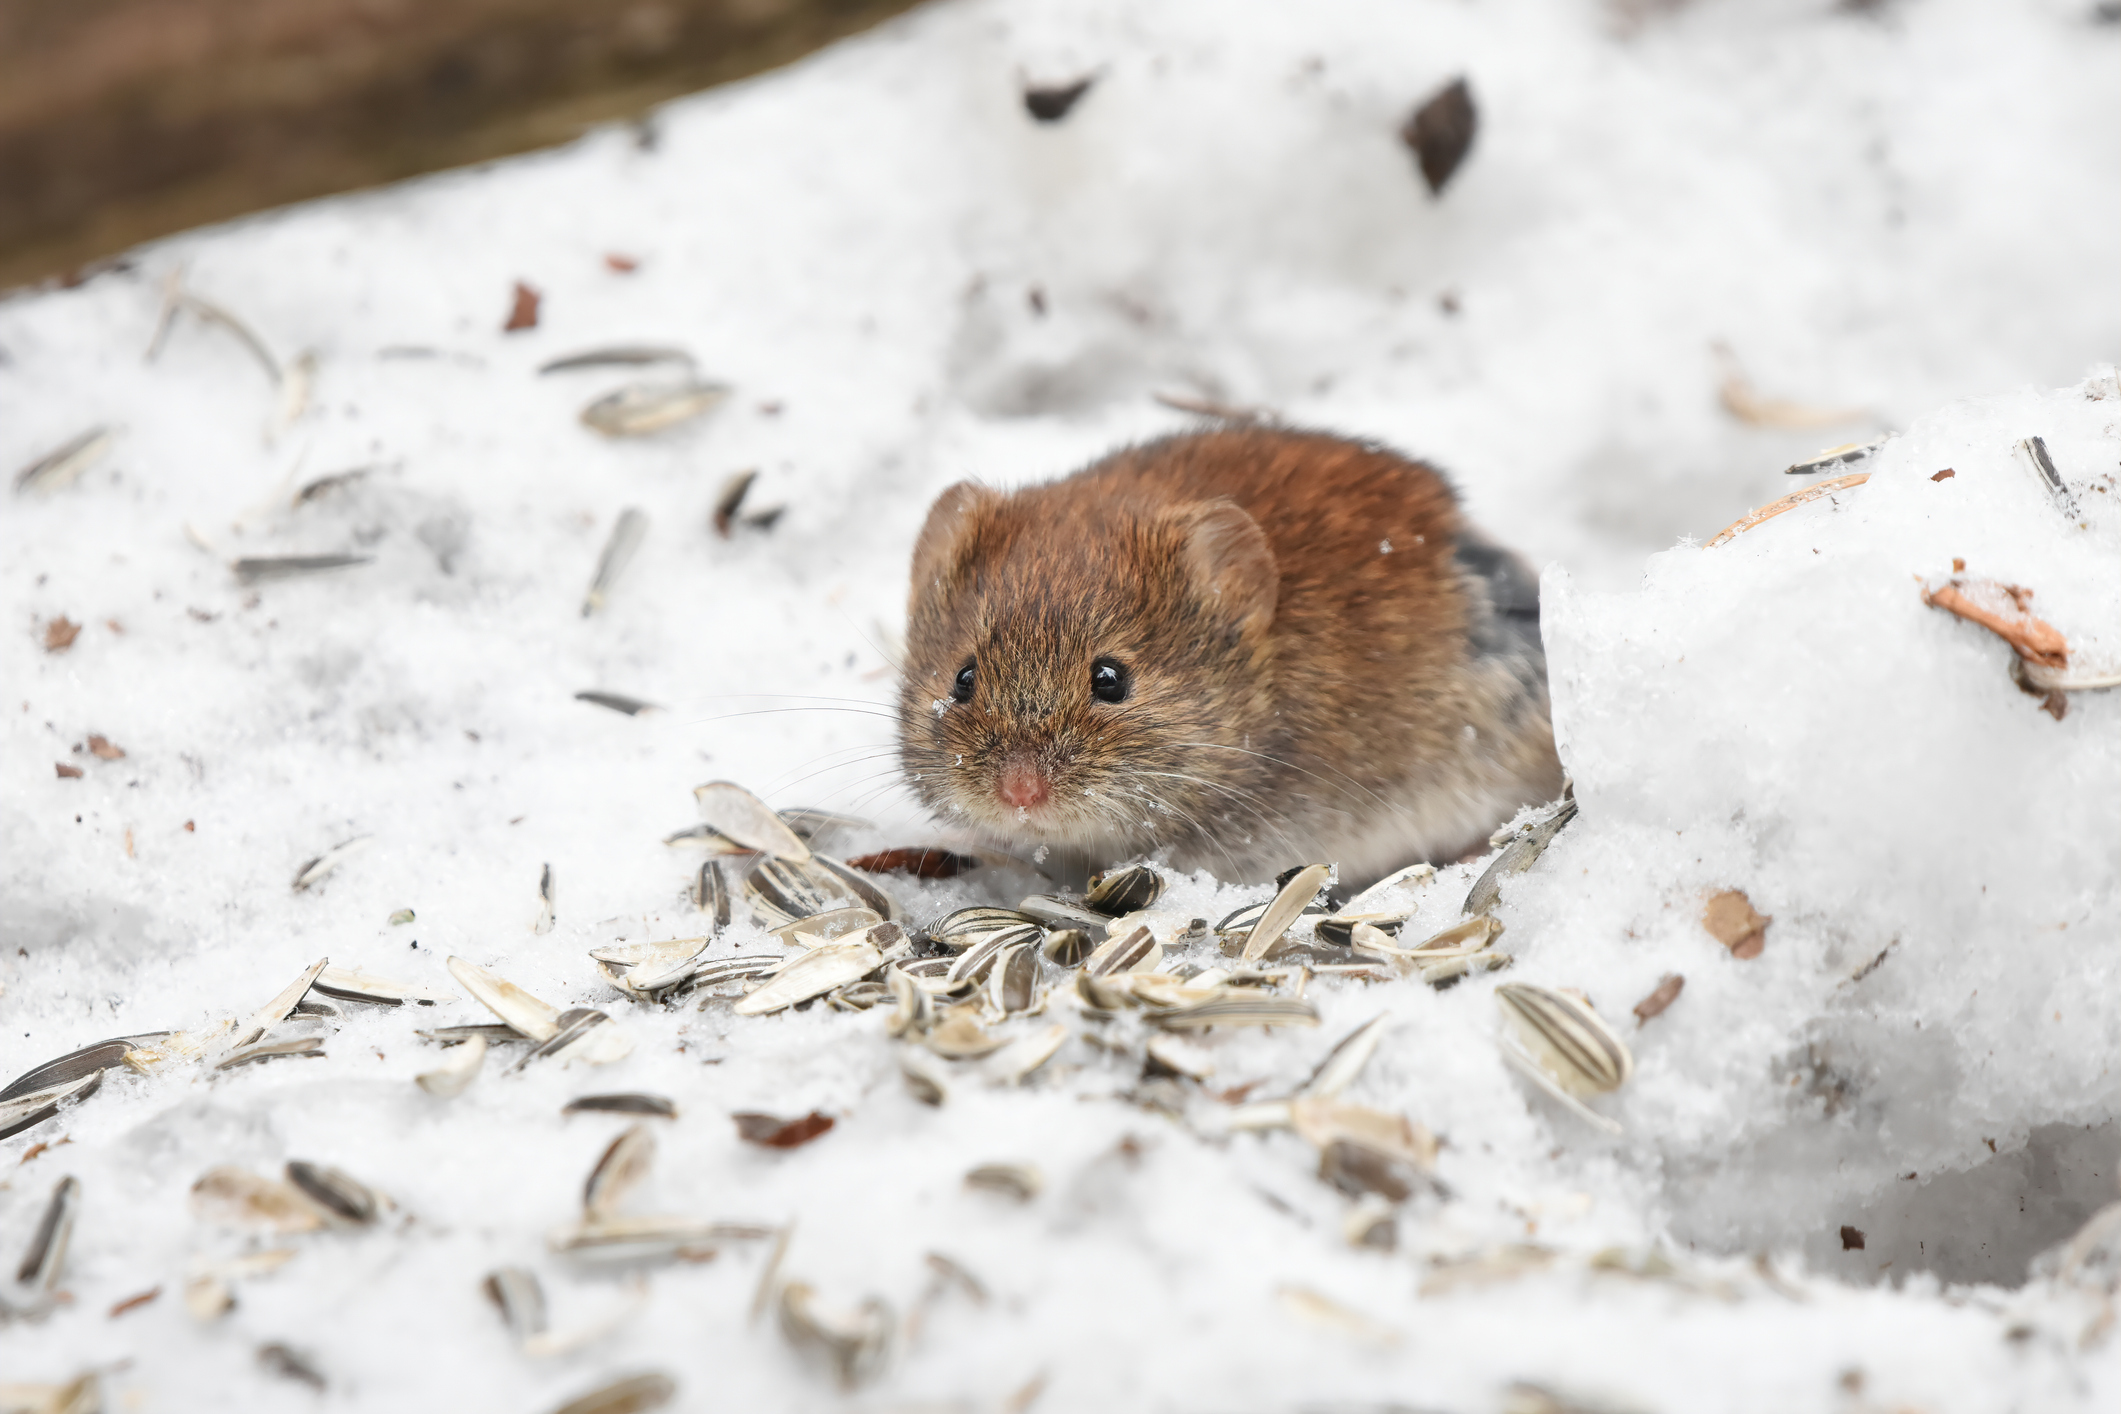  A rodent roaming outside in the snow around a house.
